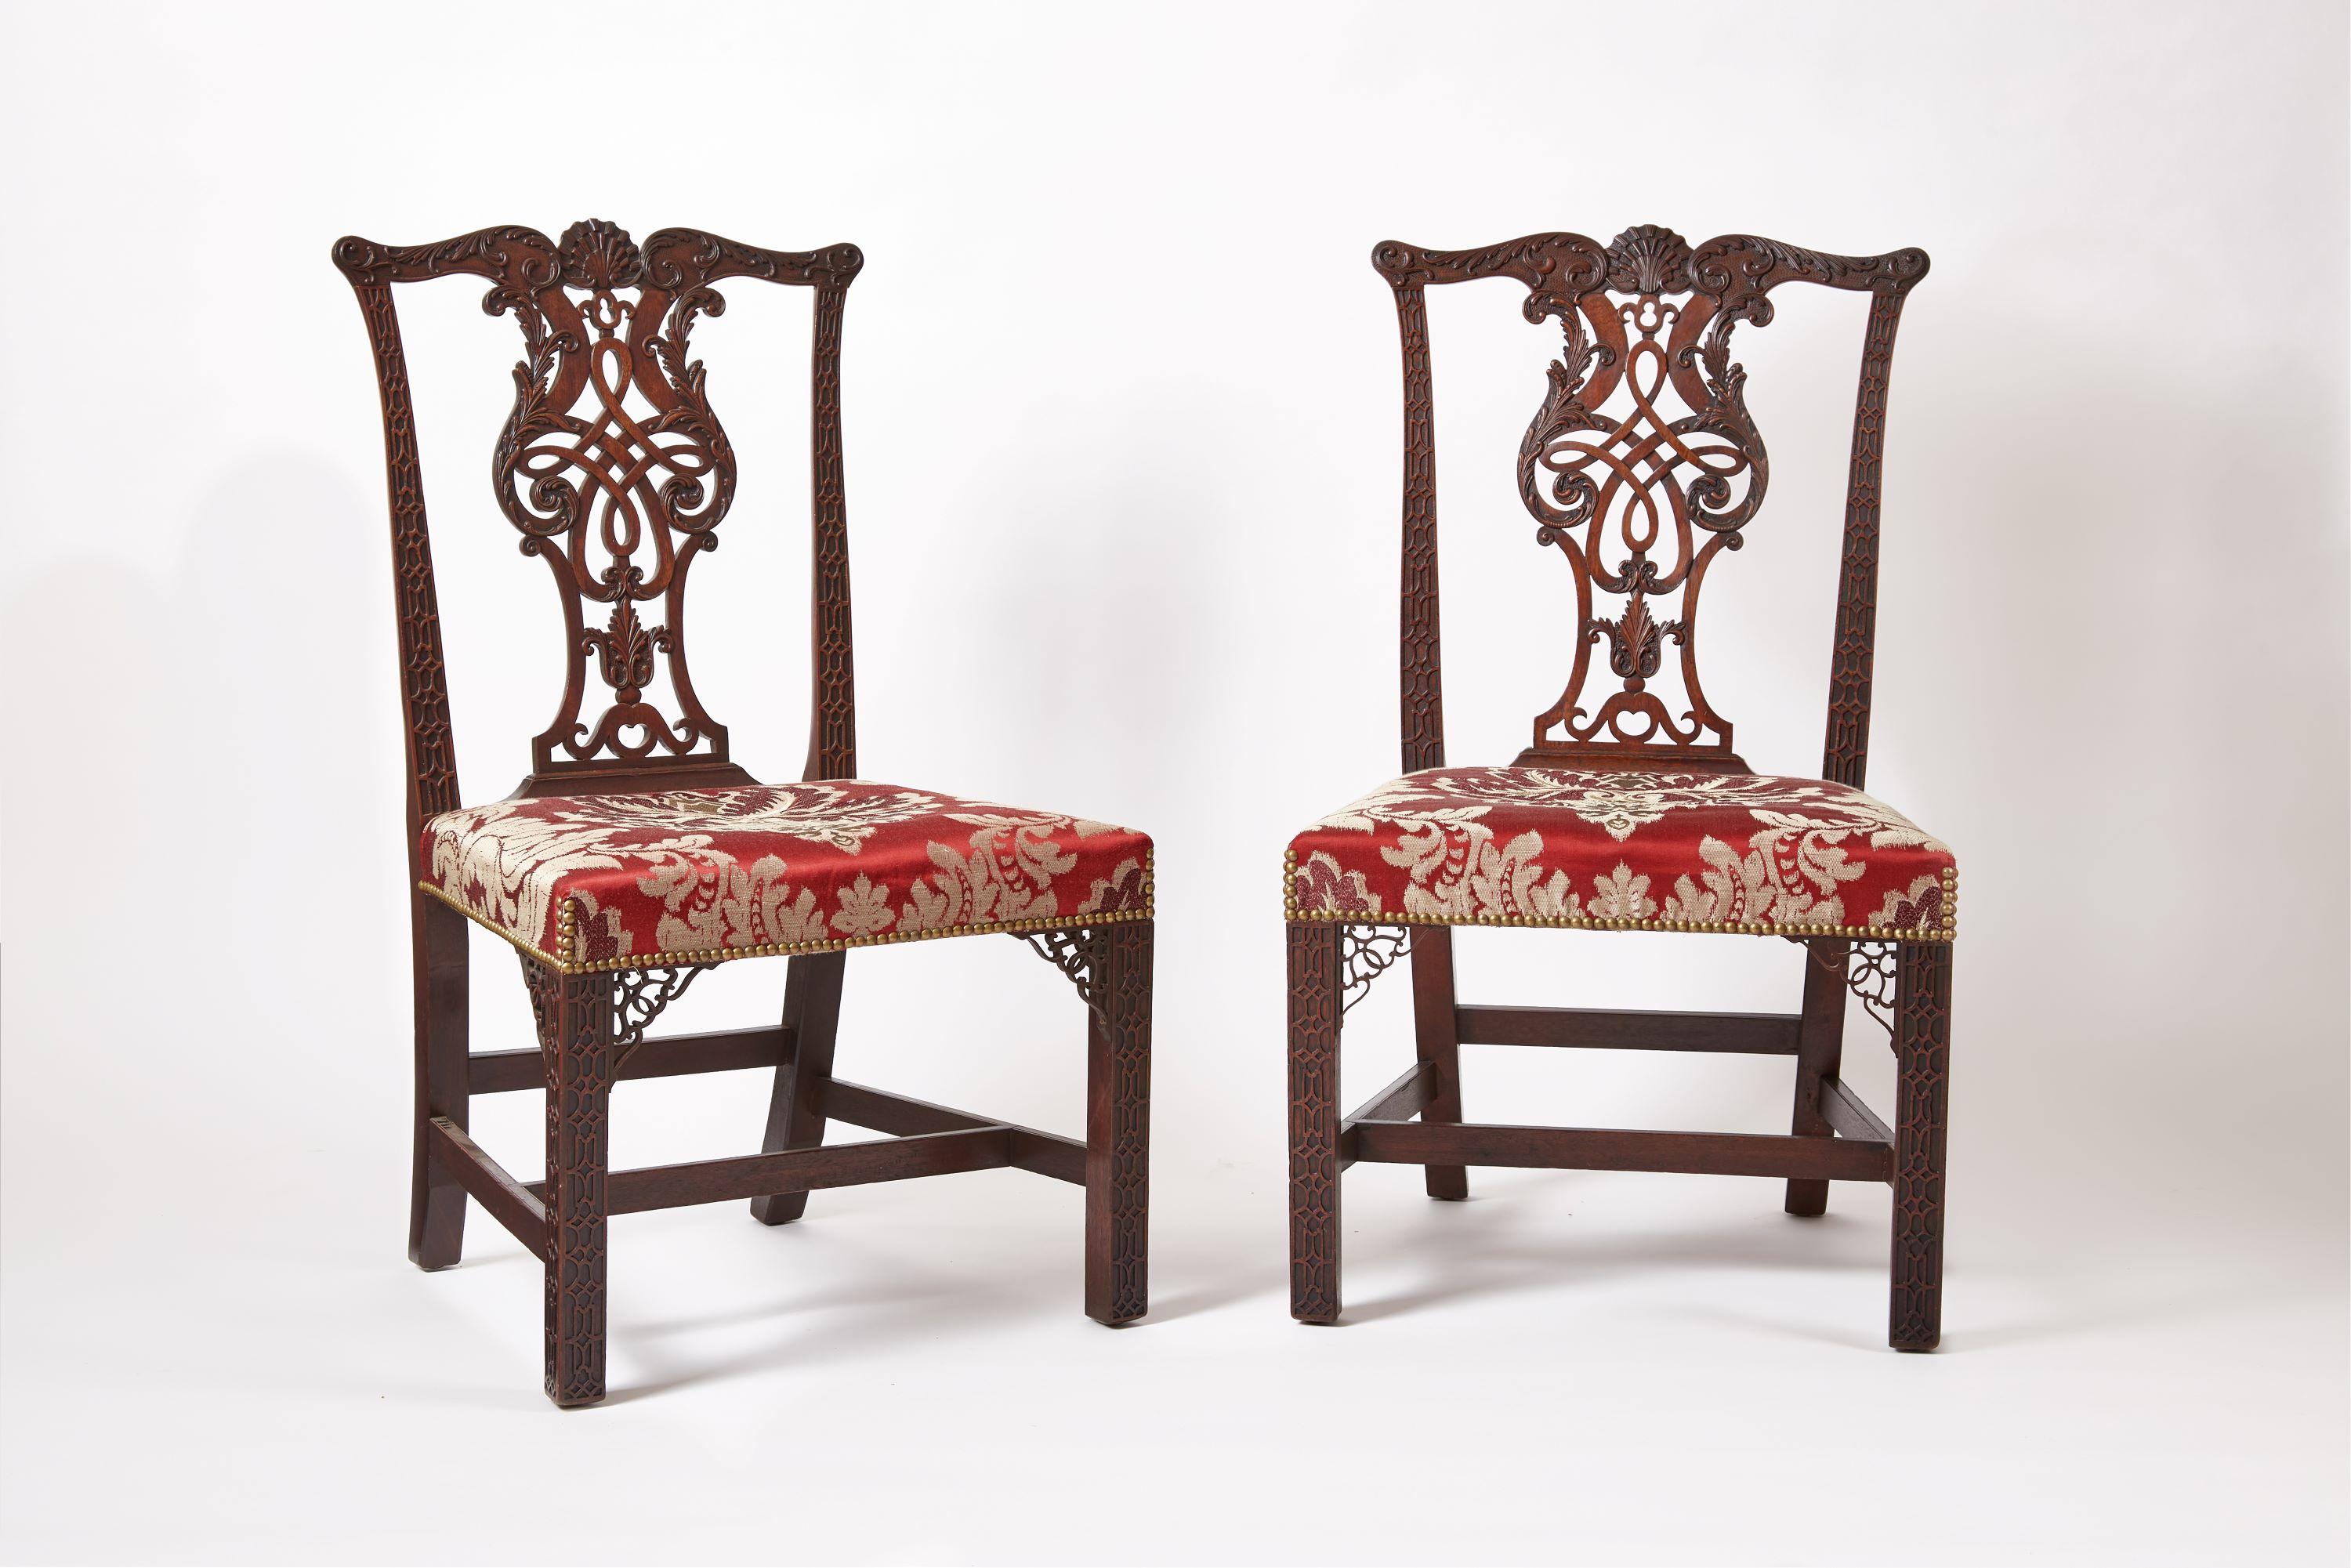 Matched Pair of Superb Mahogany Chippendale Side chairs. English, but possibly Irish.
Almost identical to one photographed in F. Lewis Hinkley's Metropolitan Furniture of the Georgian Years.